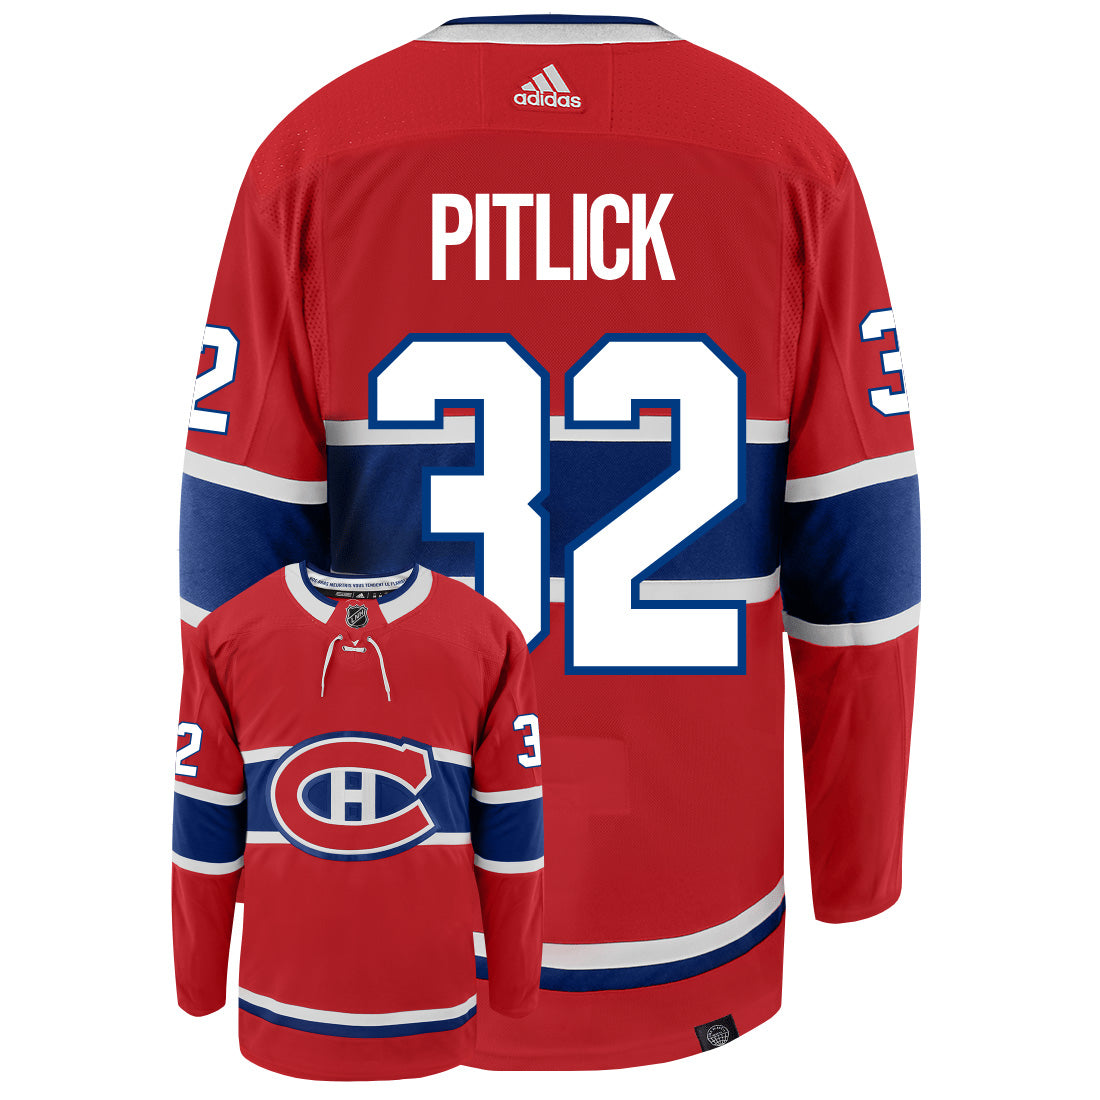 Rem Pitlick Montreal Canadiens Adidas Primegreen Authentic NHL Hockey Jersey